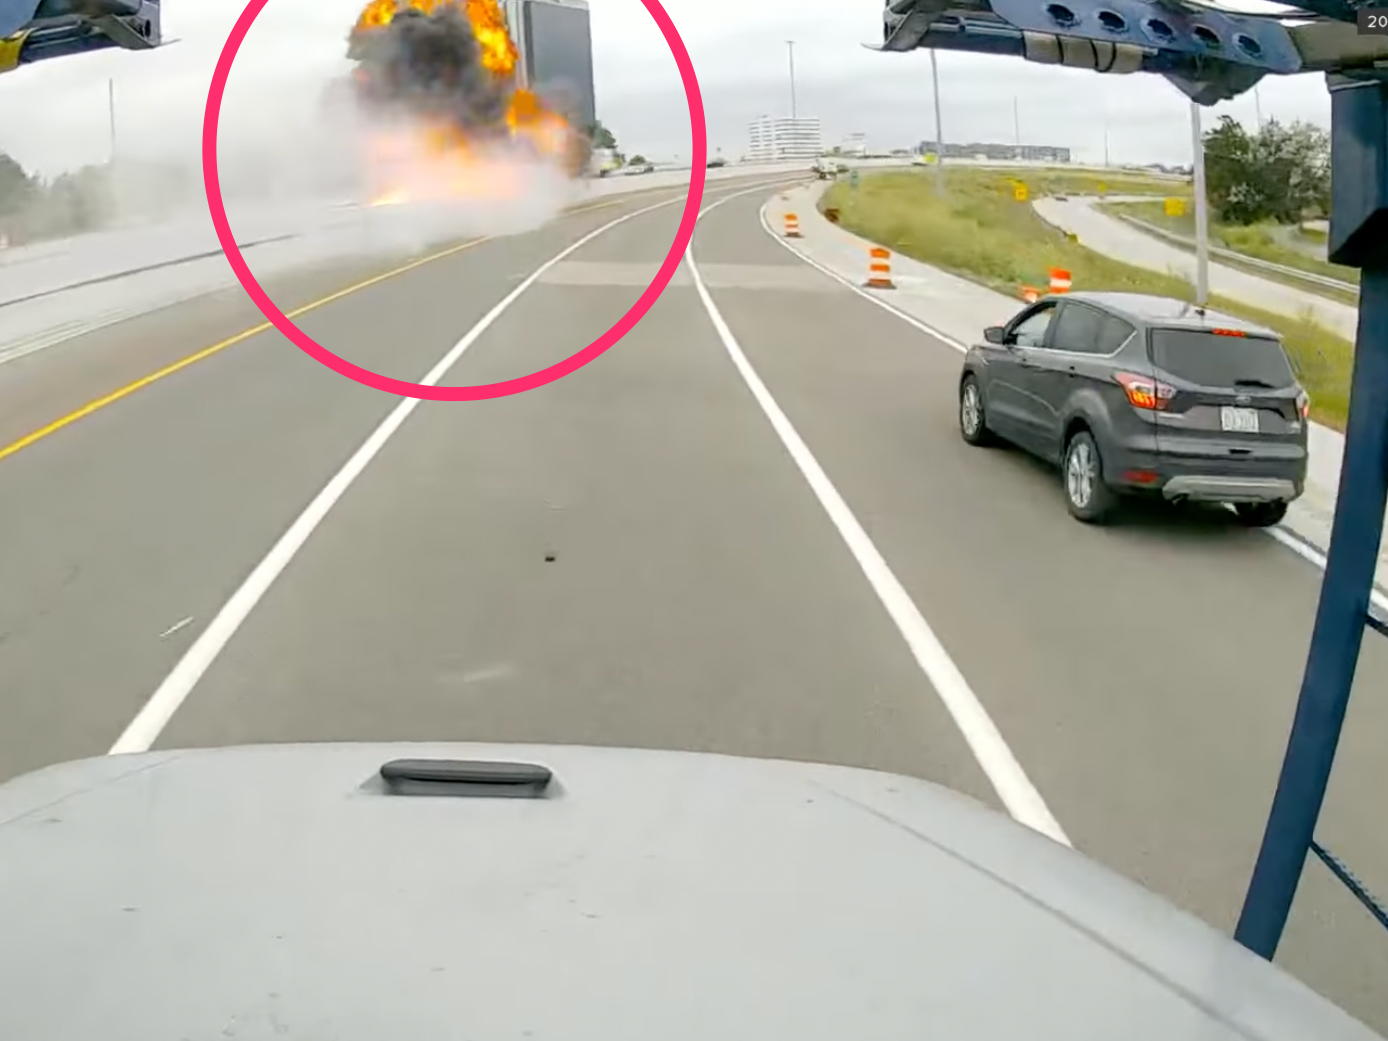 Still from a video shows a tanker truck crashing and erupting into a fireball in Michigan